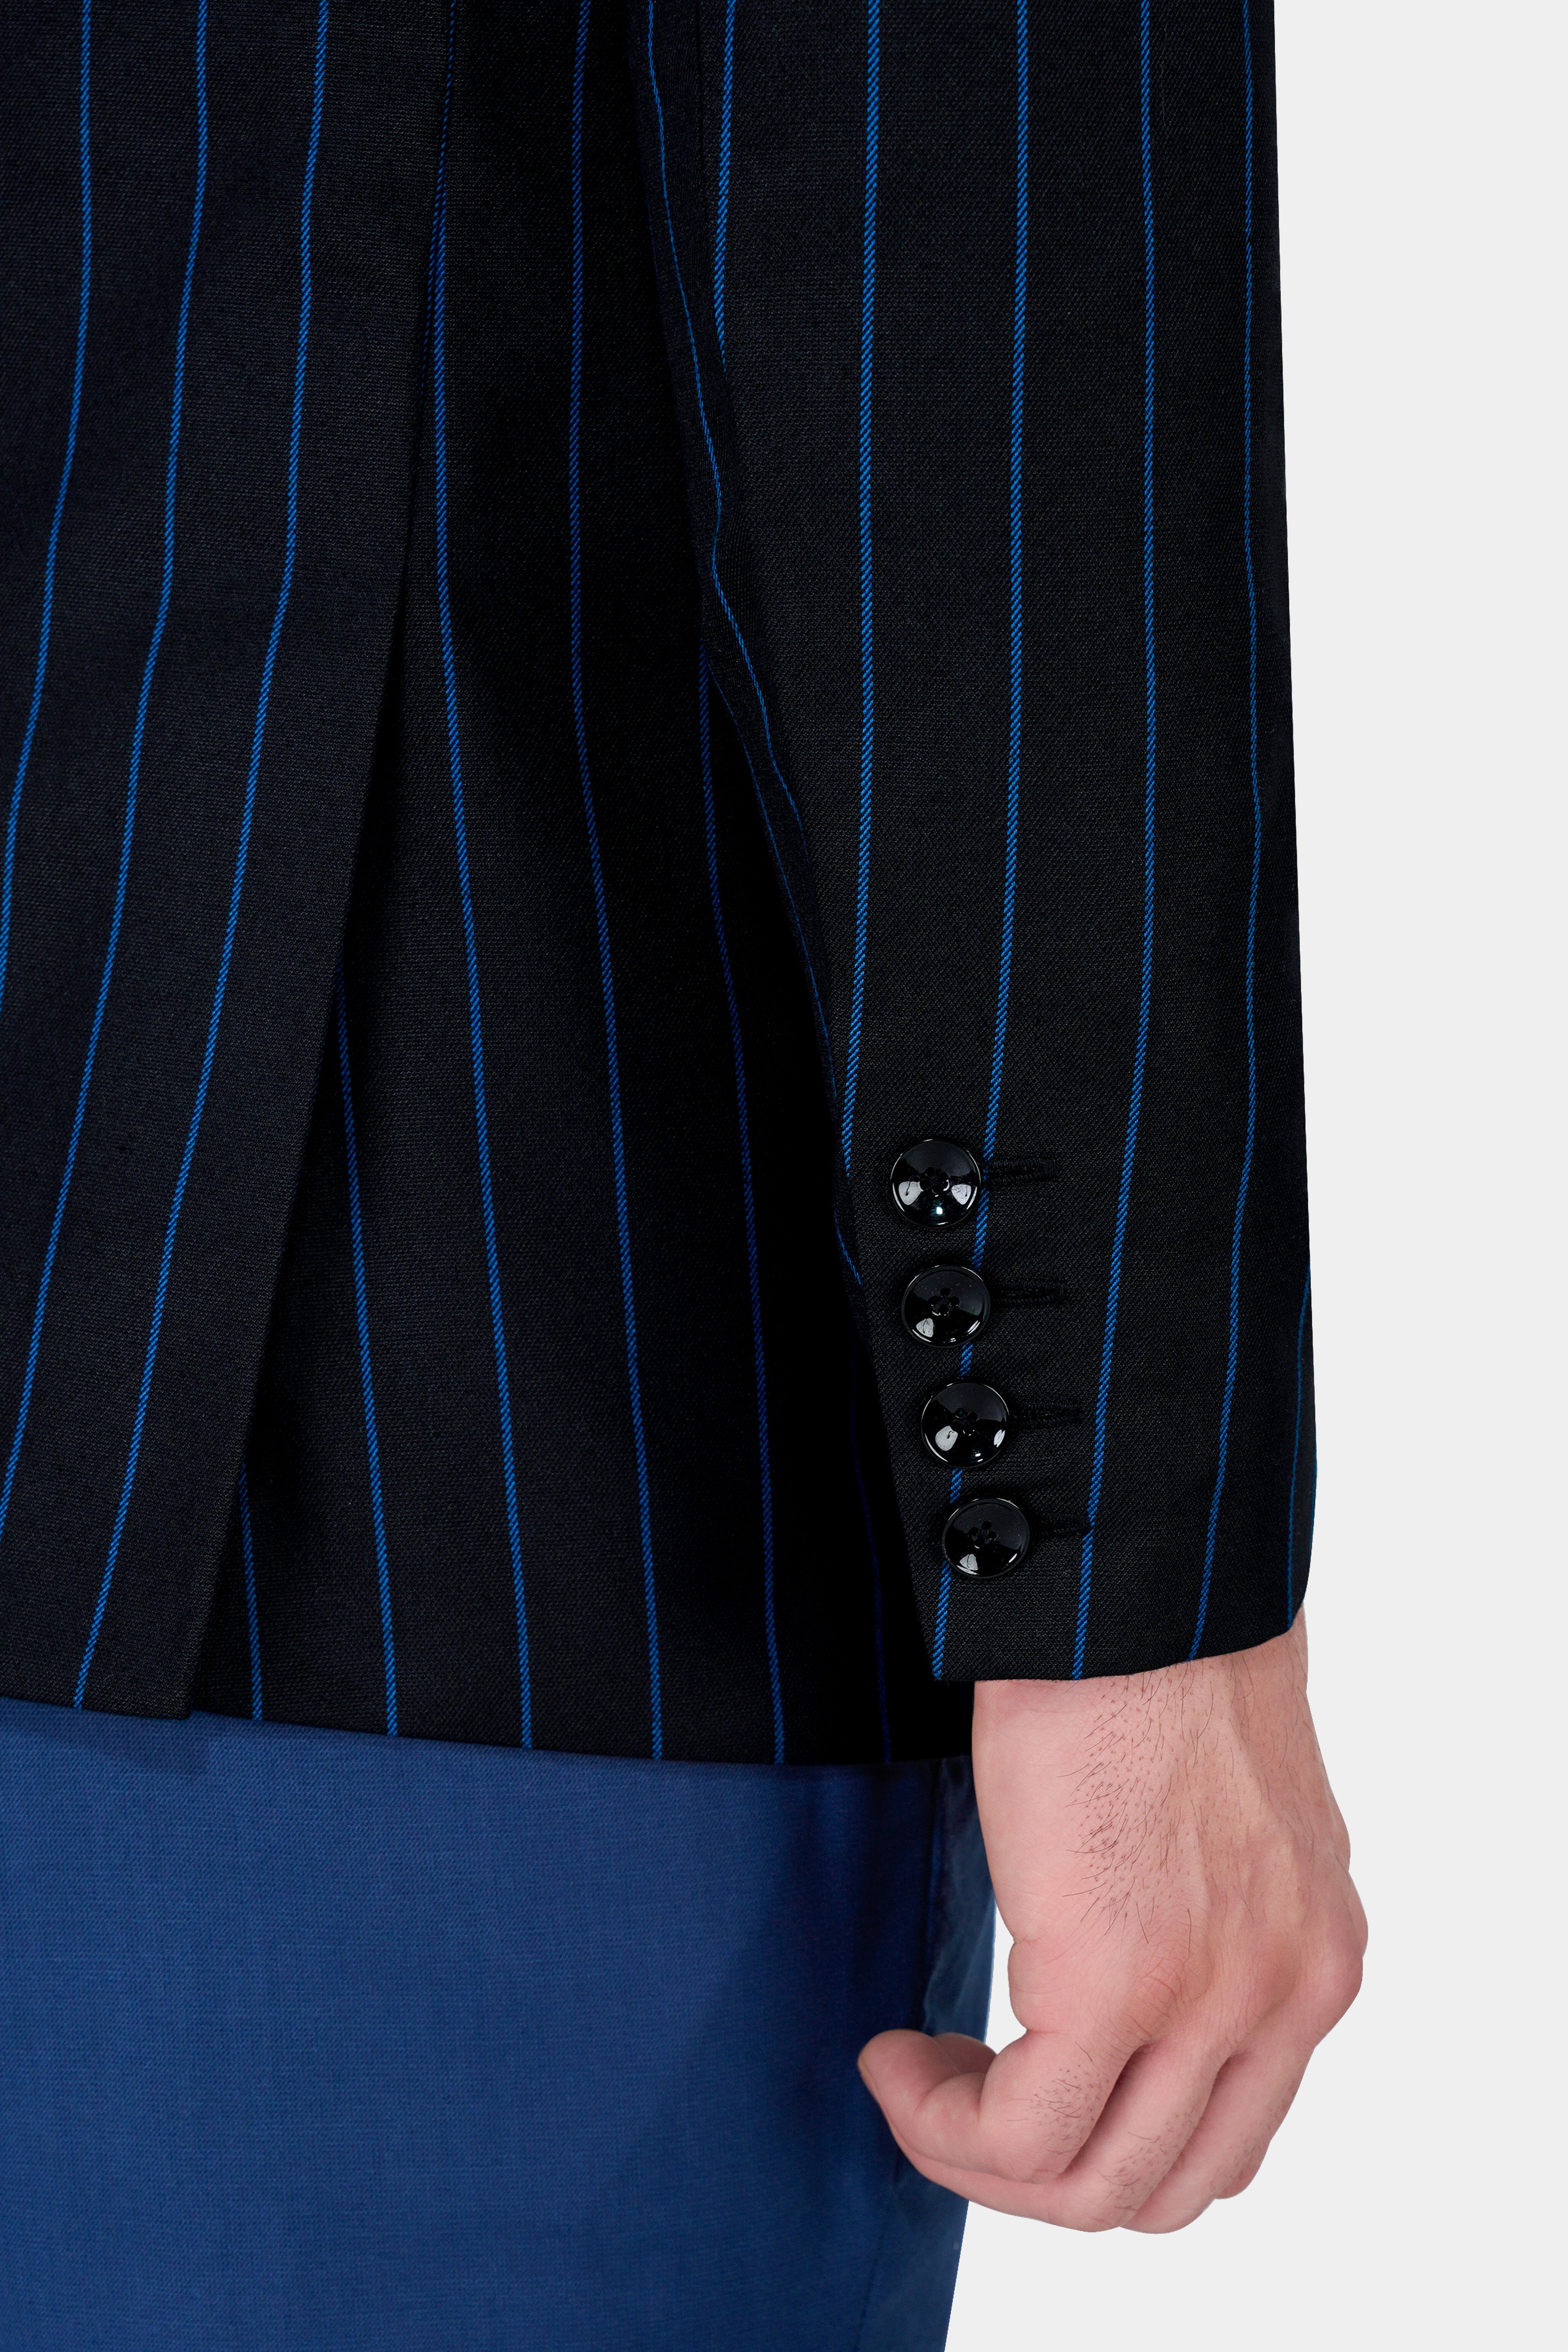 Jade Black with Persian Blue Striped Wool Rich Designer Blazer BL2854-SB-D399-36, BL2854-SB-D399-38, BL2854-SB-D399-40, BL2854-SB-D399-42, BL2854-SB-D399-44, BL2854-SB-D399-46, BL2854-SB-D399-48, BL2854-SB-D399-50, BL2854-SB-D399-52, BL2854-SB-D399-54, BL2854-SB-D399-56, BL2854-SB-D399-58, BL2854-SB-D399-60